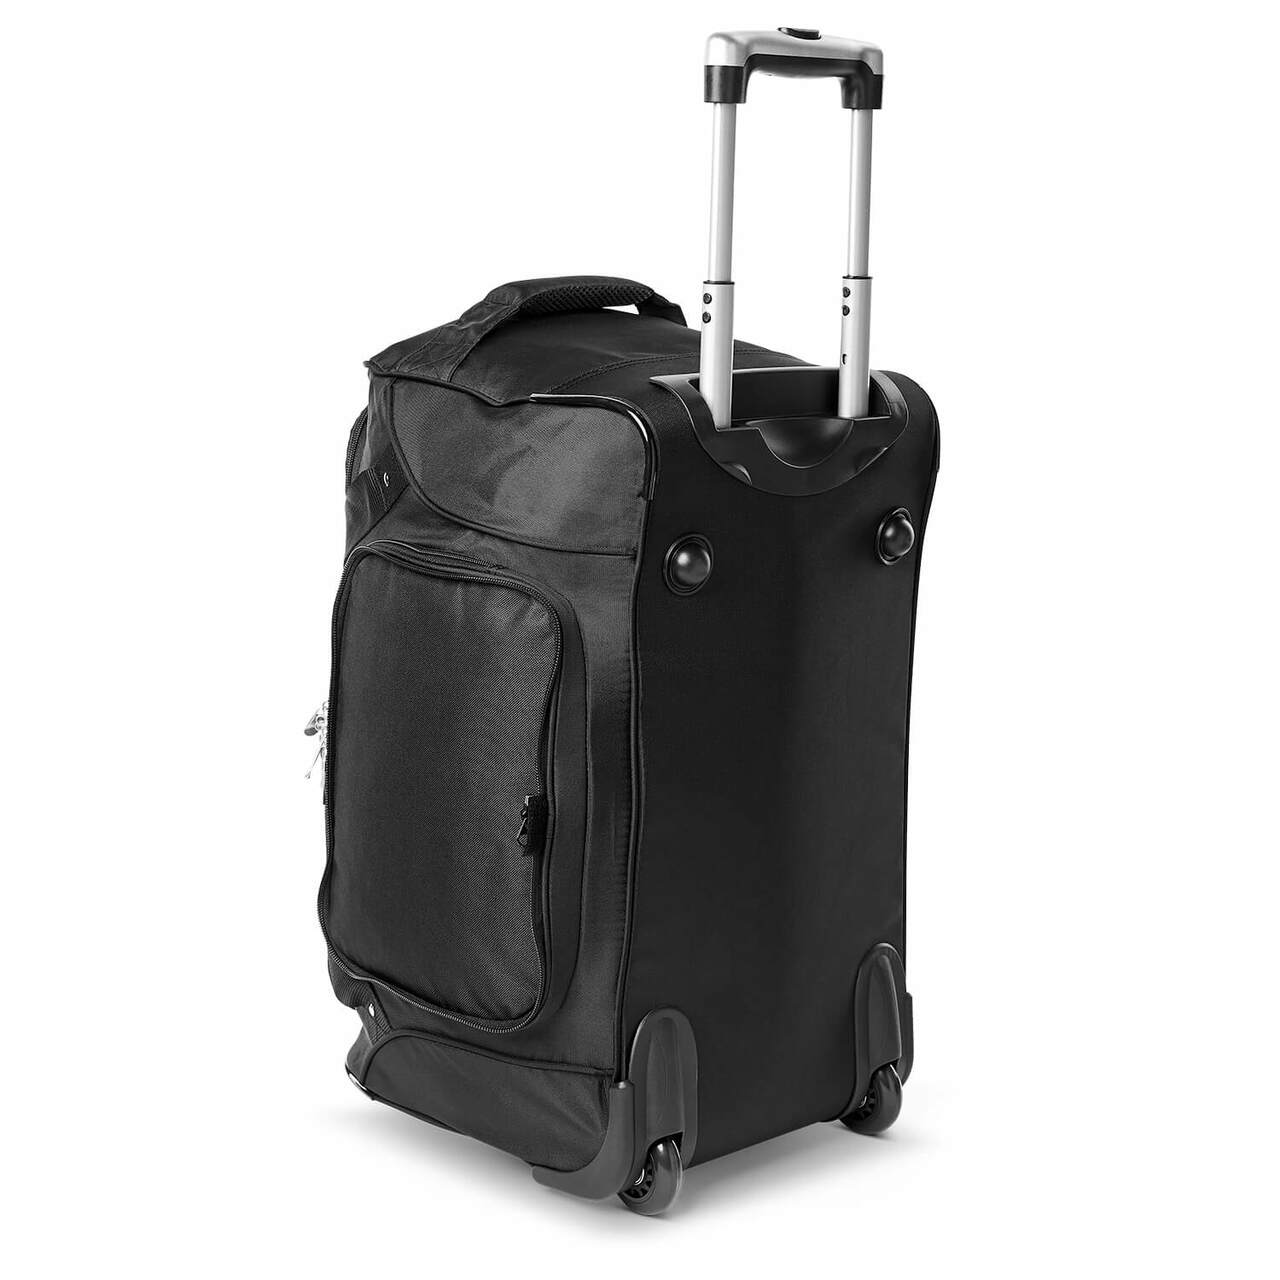 Miss Rebels Luggage | Miss Rebels Wheeled Carry On Luggage